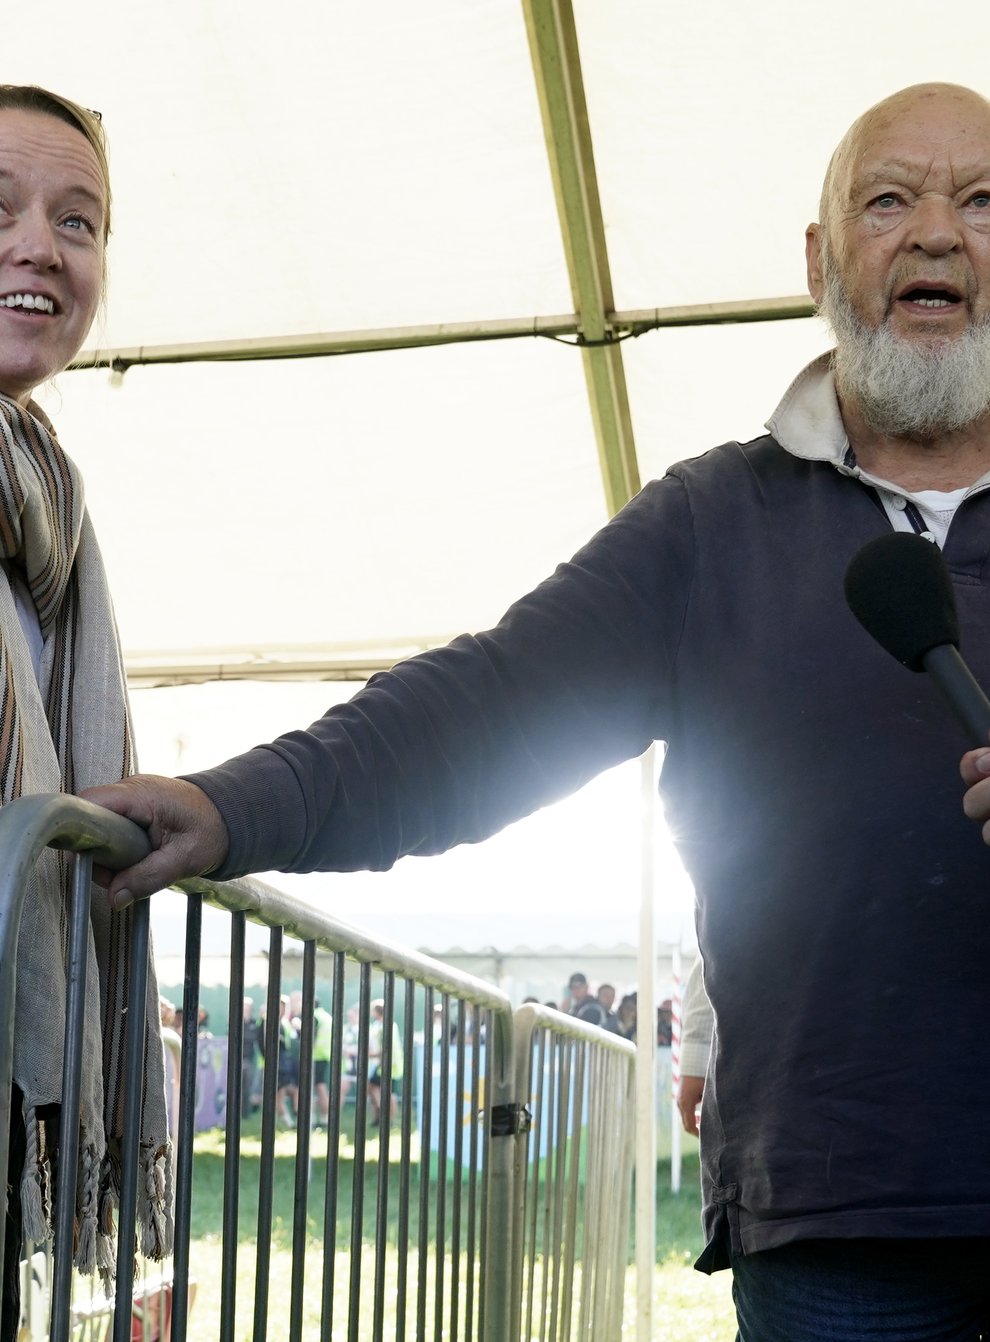 Glastonbury organisers Michael and Emily Eavis greeted ticket-holders as the gates opened for this year’s festival (Yui Mok/PA)